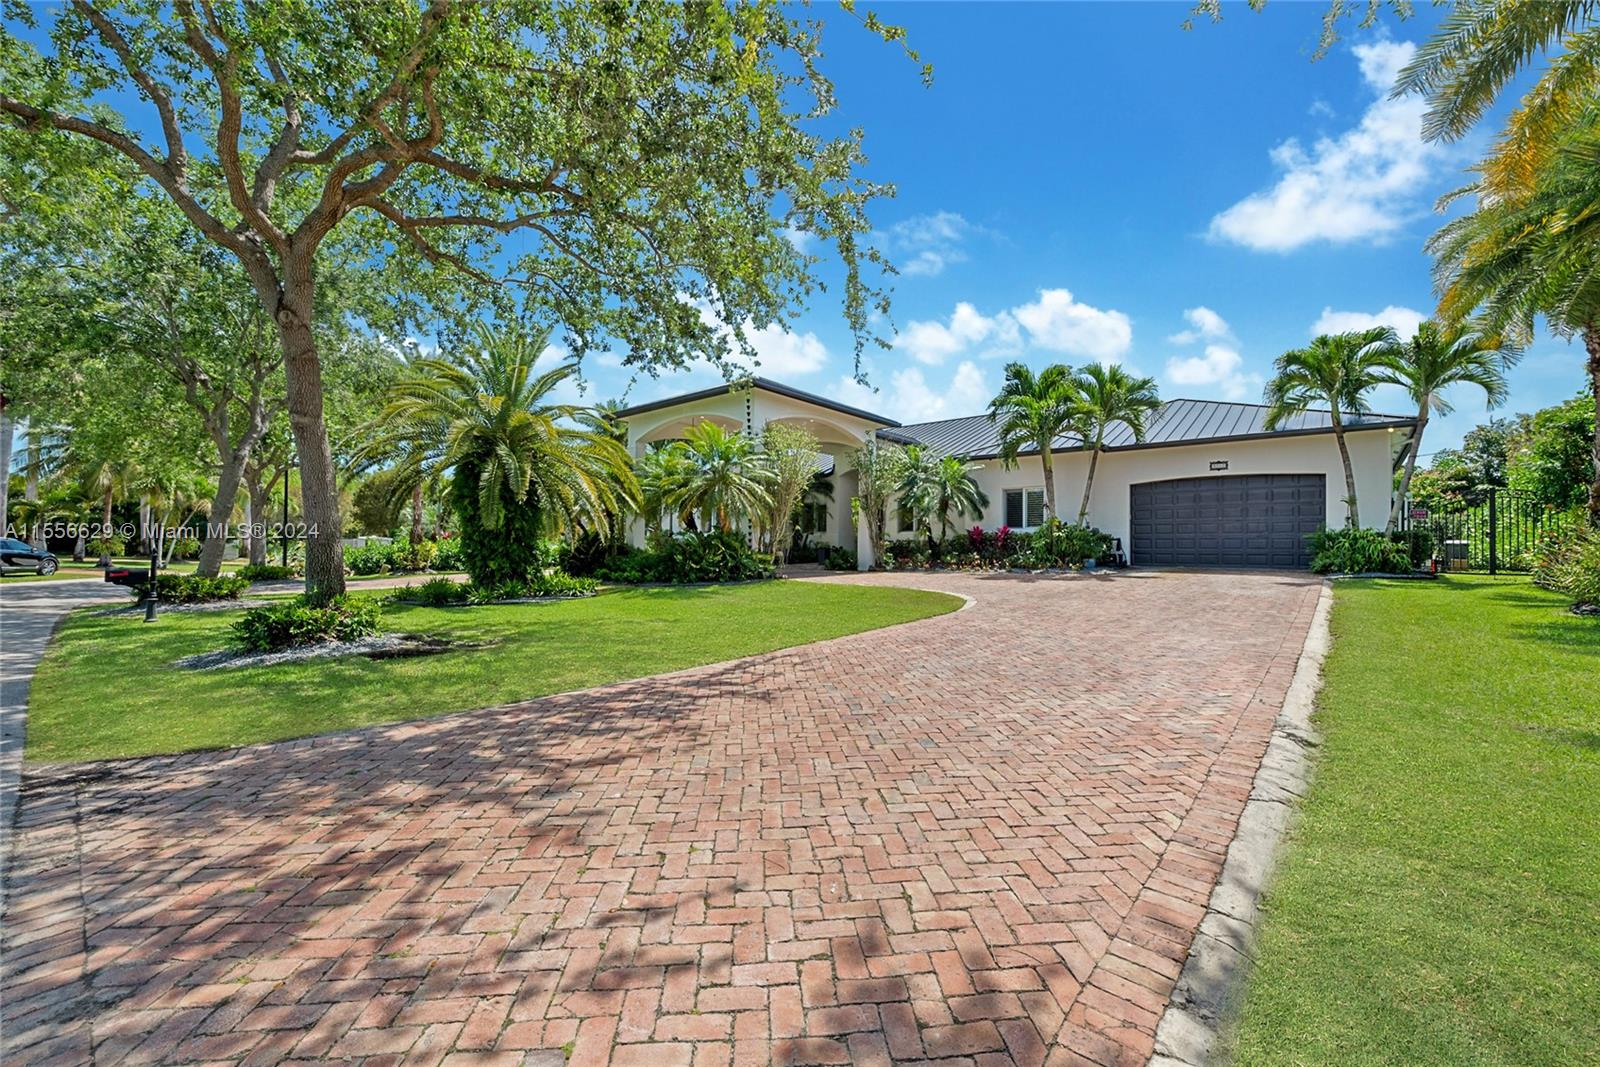 Come discover this captivating 1-story home with 5,319 sf in Palmetto Bay.  Enjoy 5 bedrooms, 1 office, and 5 baths in this modern oasis. Revel in marble floors, a lavish master suite, and a gourmet kitchen. Outdoors, find a fully-equipped gazebo with an outdoor kitchen, custom made coral rock firepit, and pristine pool, perfect for an active family lifestyle. Updated in 2021 with a new roof, A/C, and freshly painted exterior. In addition this family home includes plantation shutters, impact windows & California closets throughout. Located on a quiet desirable street, near top private schools such as Palmer Trinity and Westminster Christian, and beautiful parks, this home offers a perfect blend of luxury and convenience. Your dream Palmetto Bay lifestyle awaits!